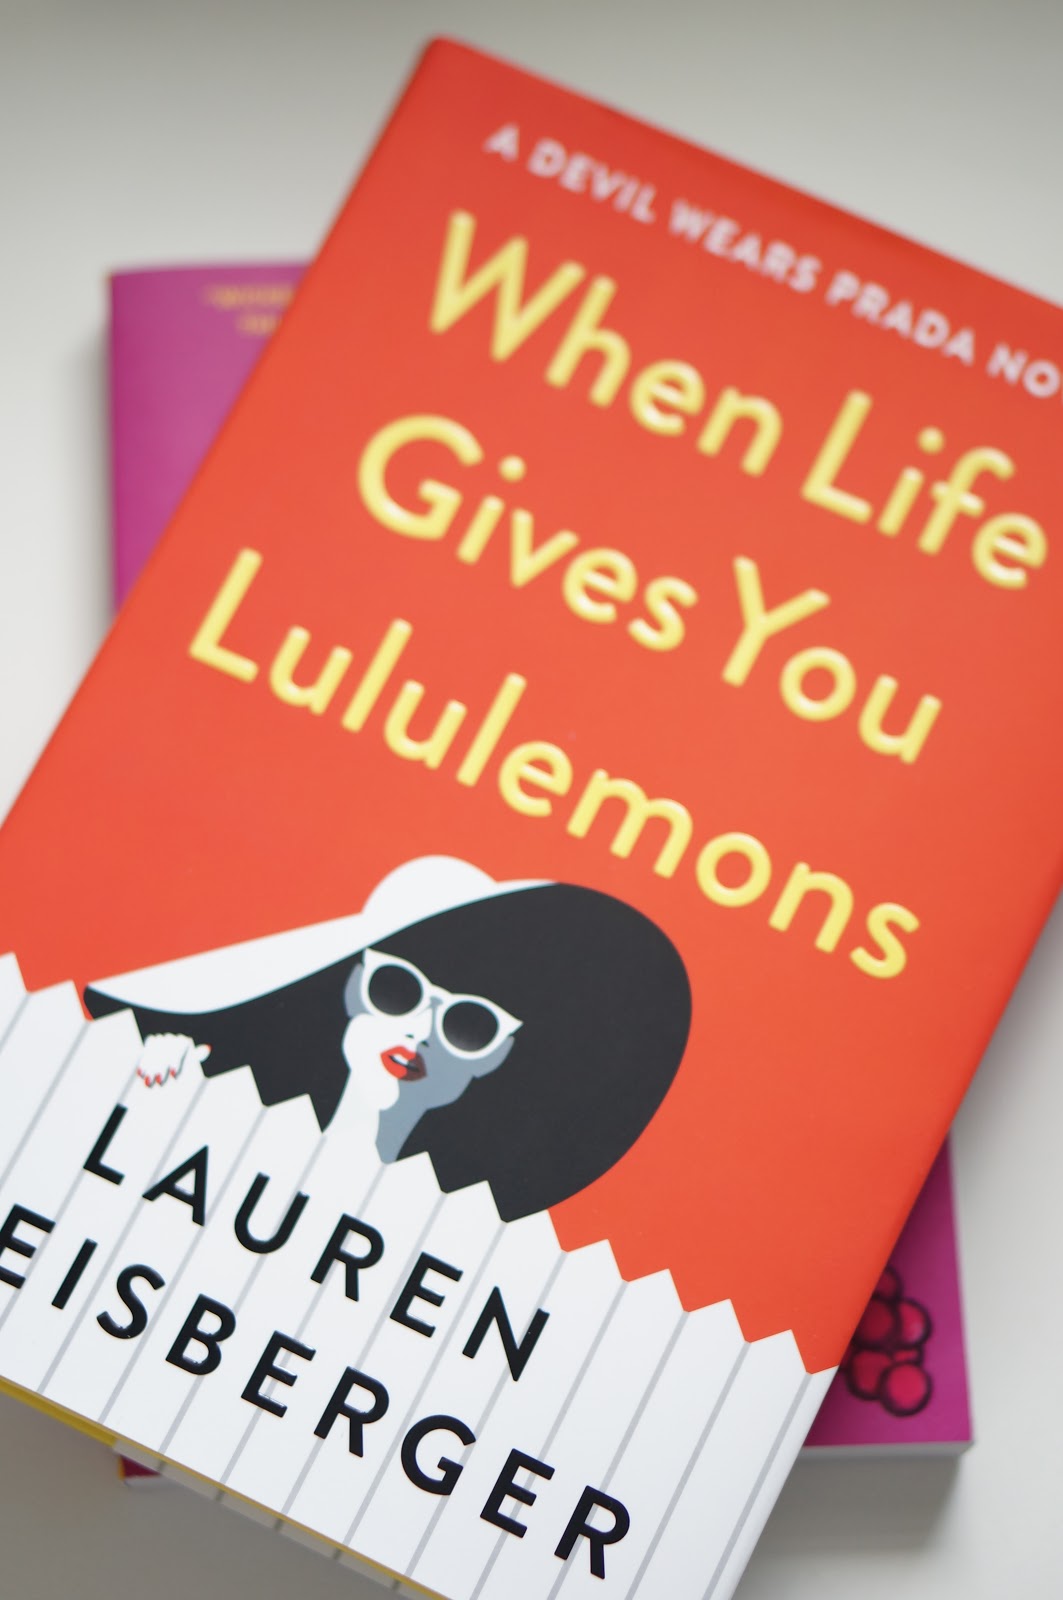 Popular North Carolina style blogger Rebecca Lately shares her review of When Life Gives You Lululemons by Lauren Weisberger. Click here to read her review!